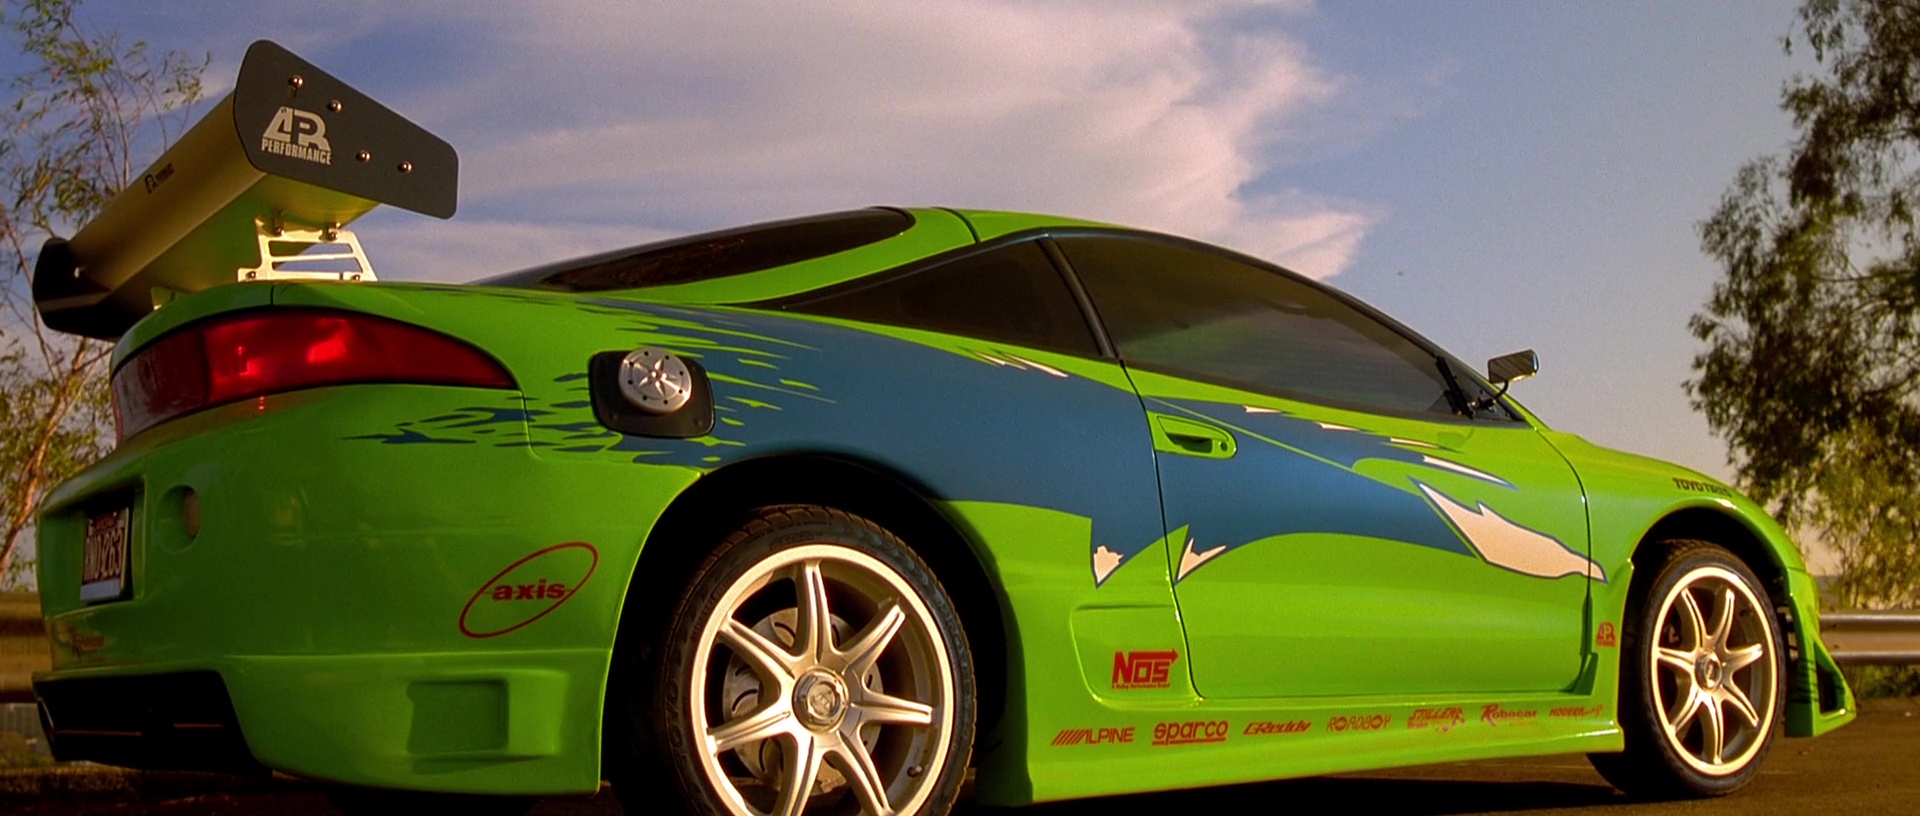 fast and furious 4 green car